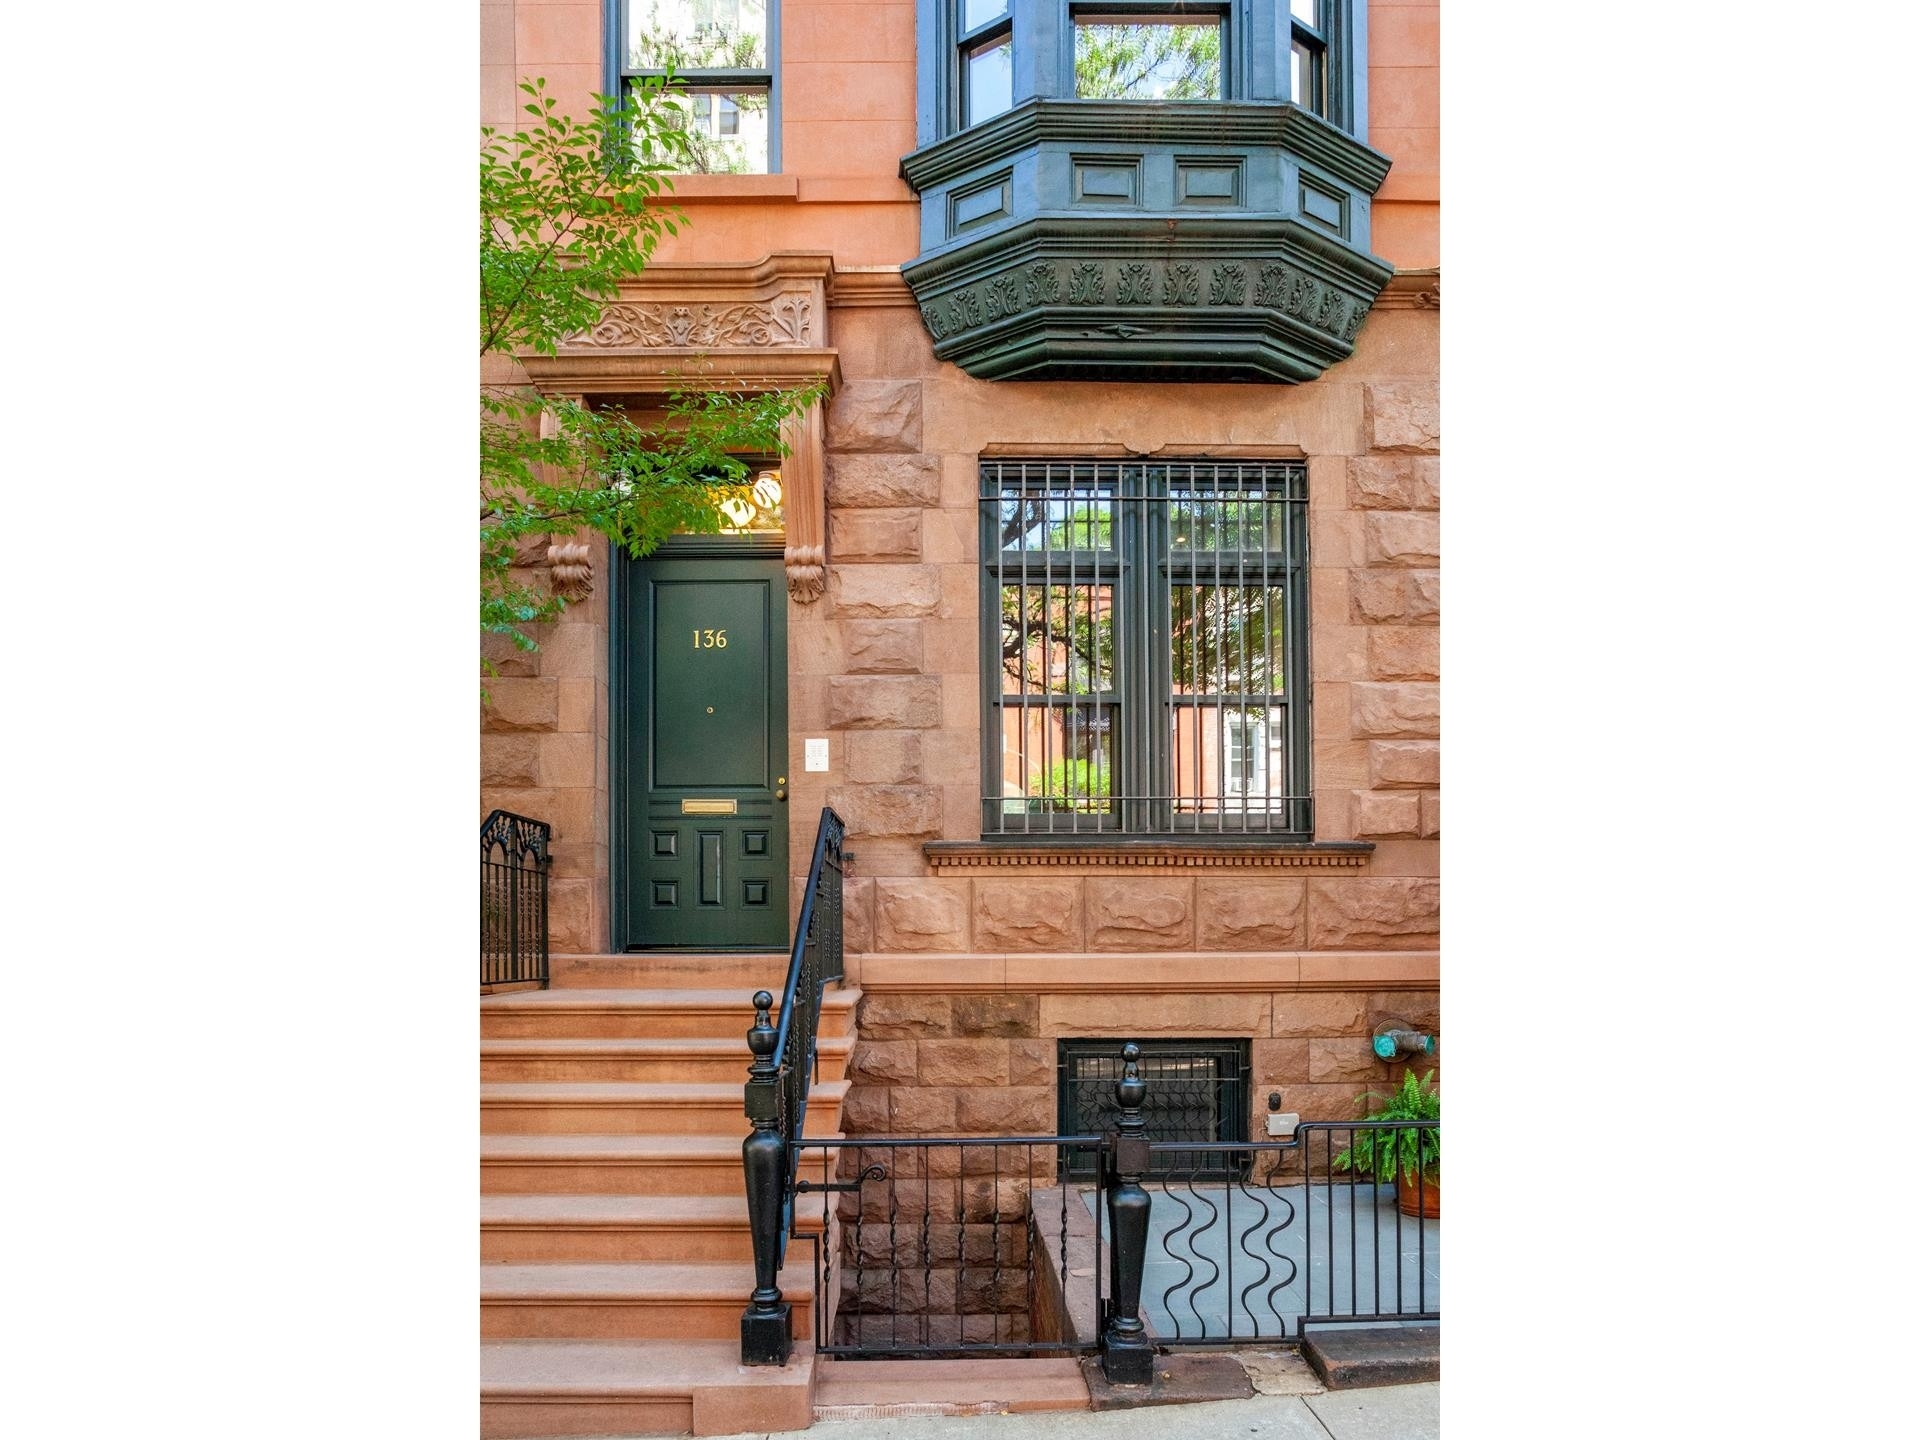 1. Single Family Townhouse for Sale at 136 MANHATTAN AVE, TOWNHOUSE Manhattan Valley, New York, NY 10025